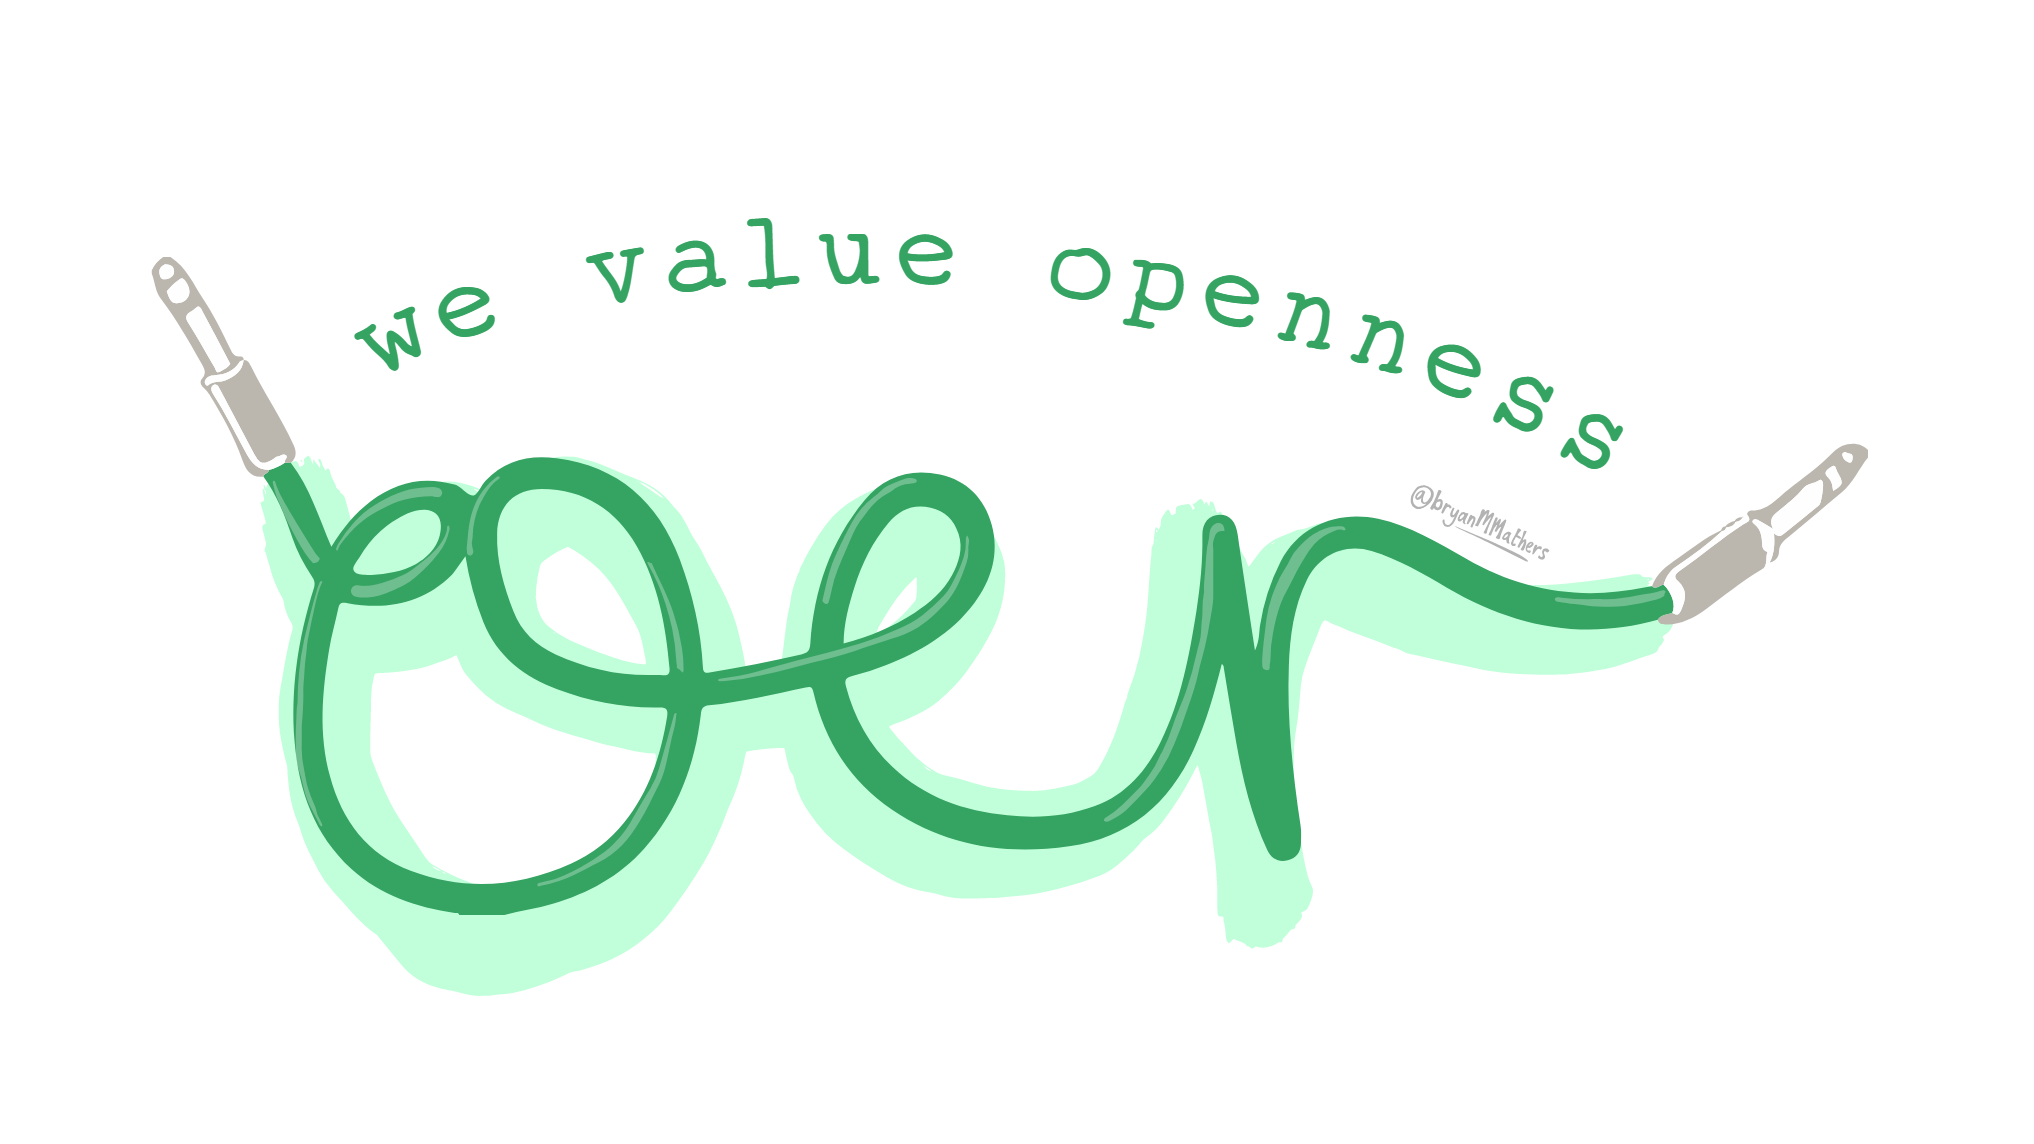 OER image saying we value openness